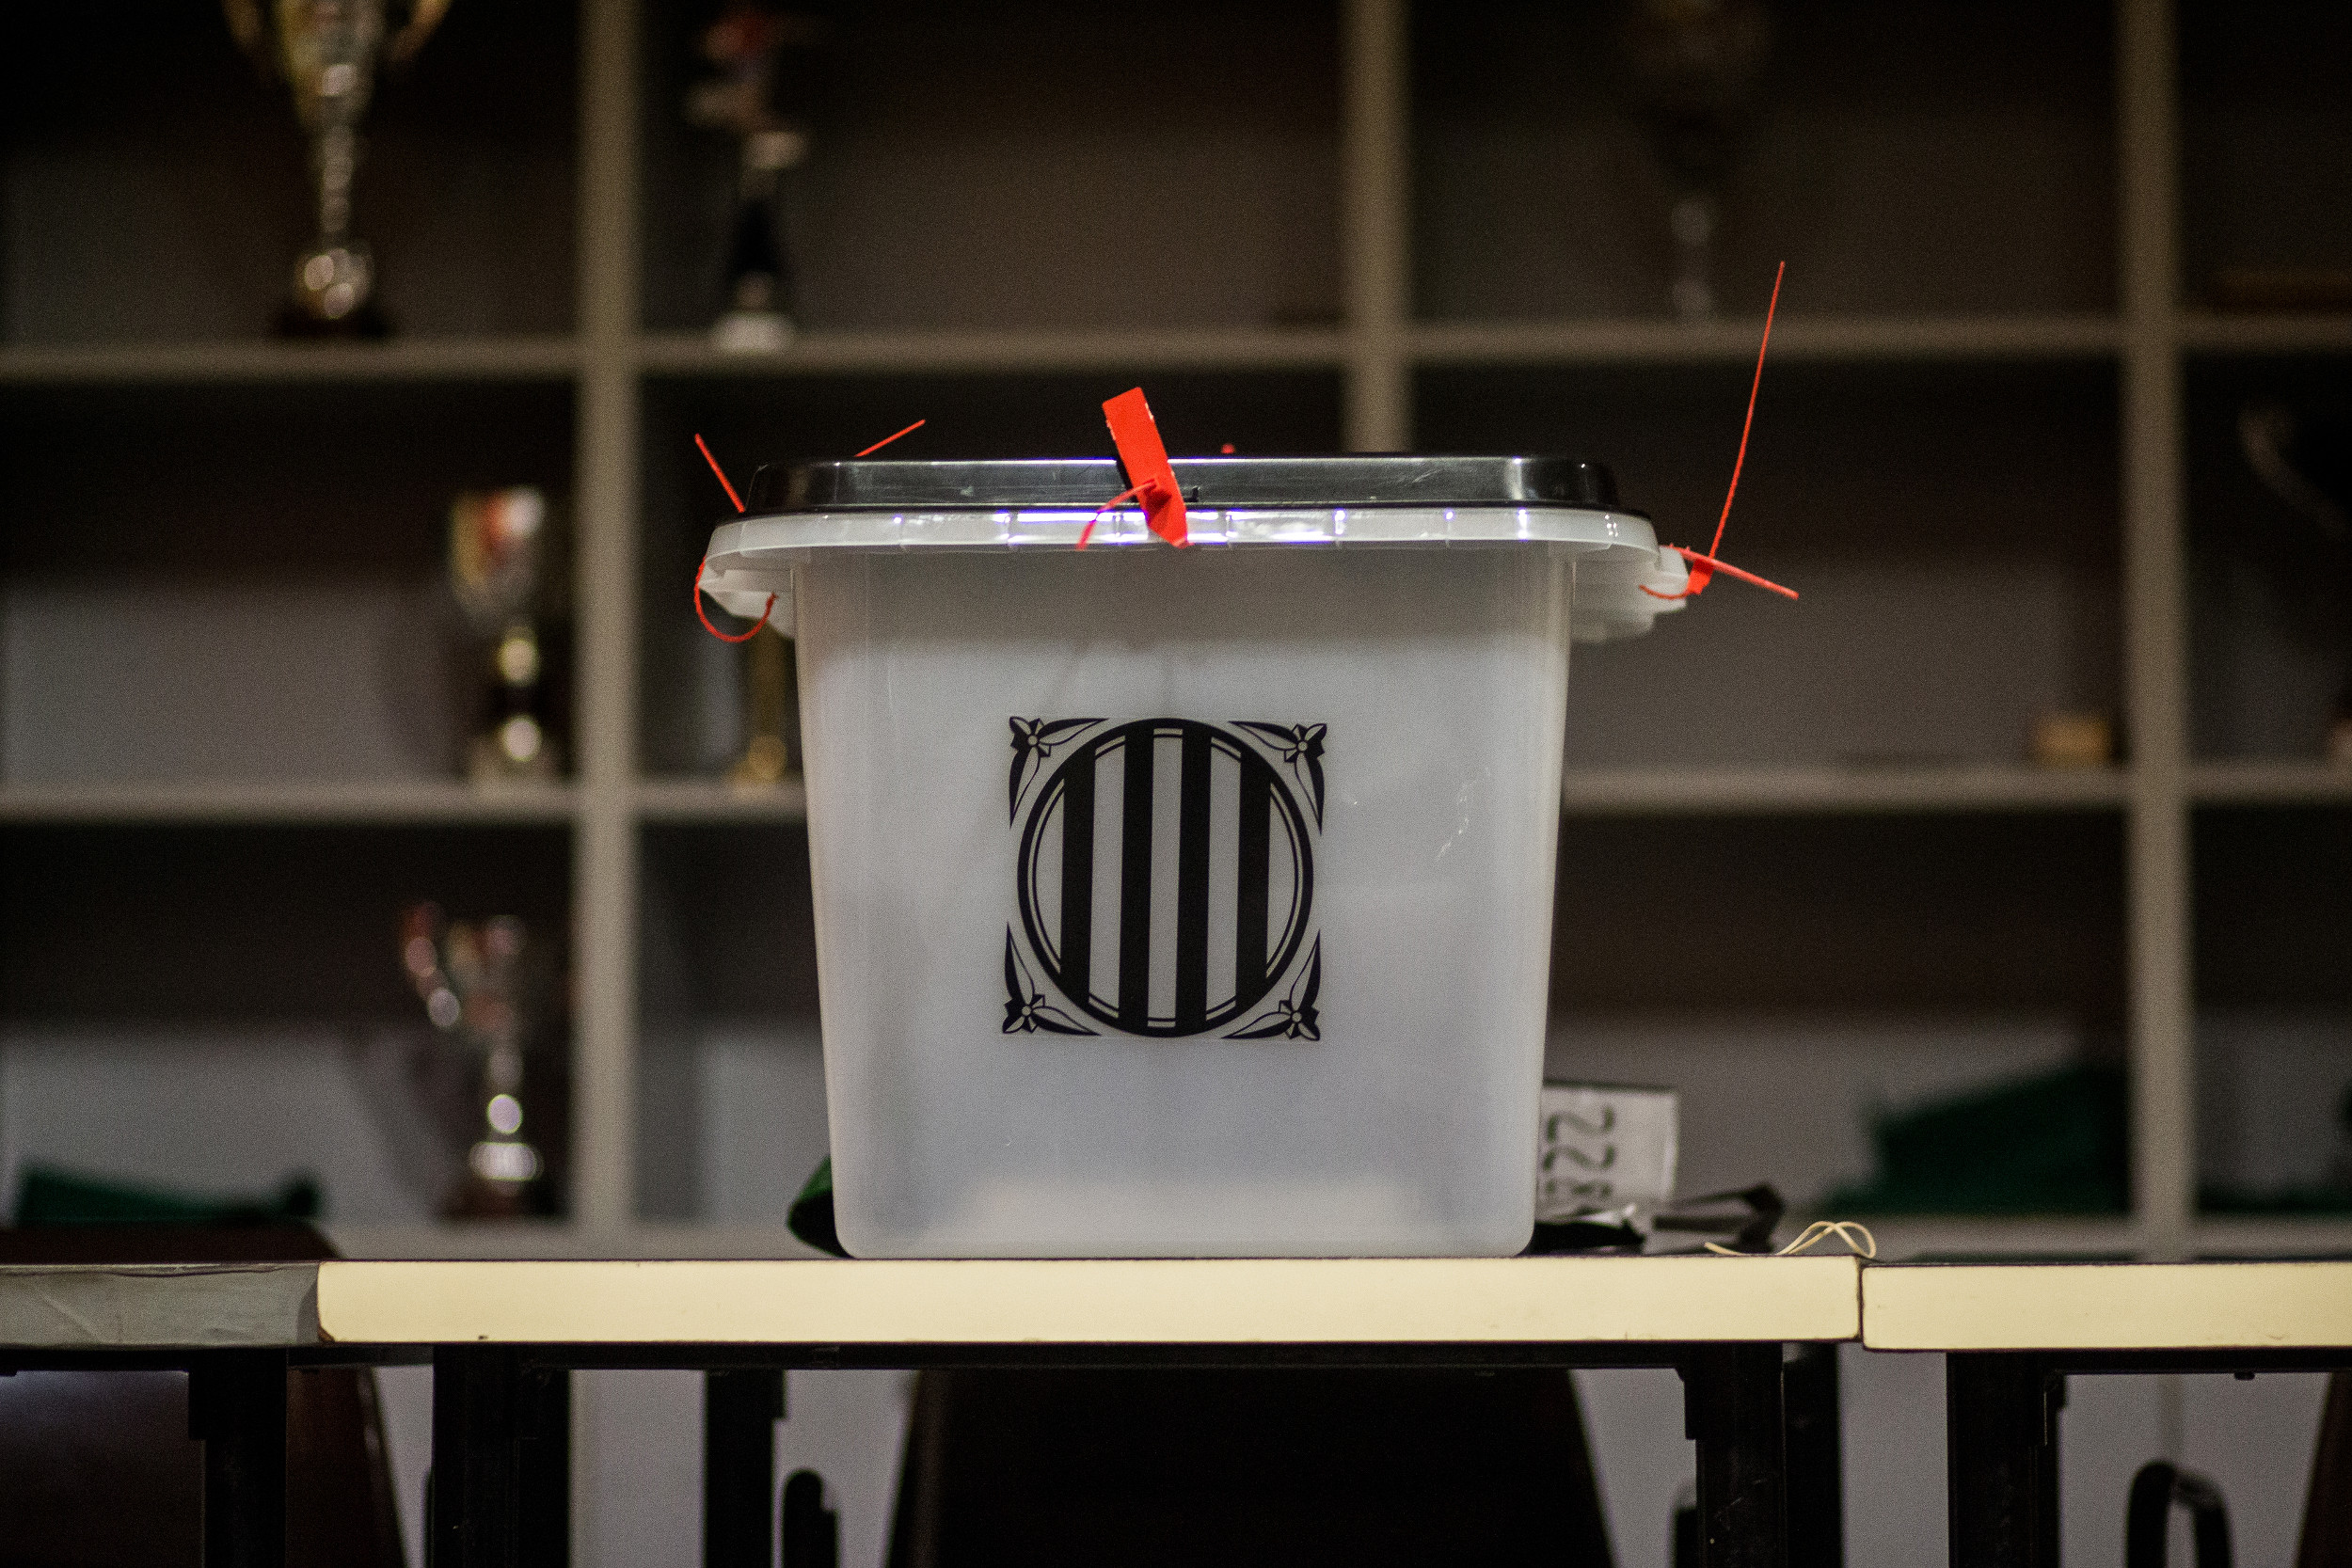 The ballot box of the Catalan independence referendum in a polling station on October 1, 2017